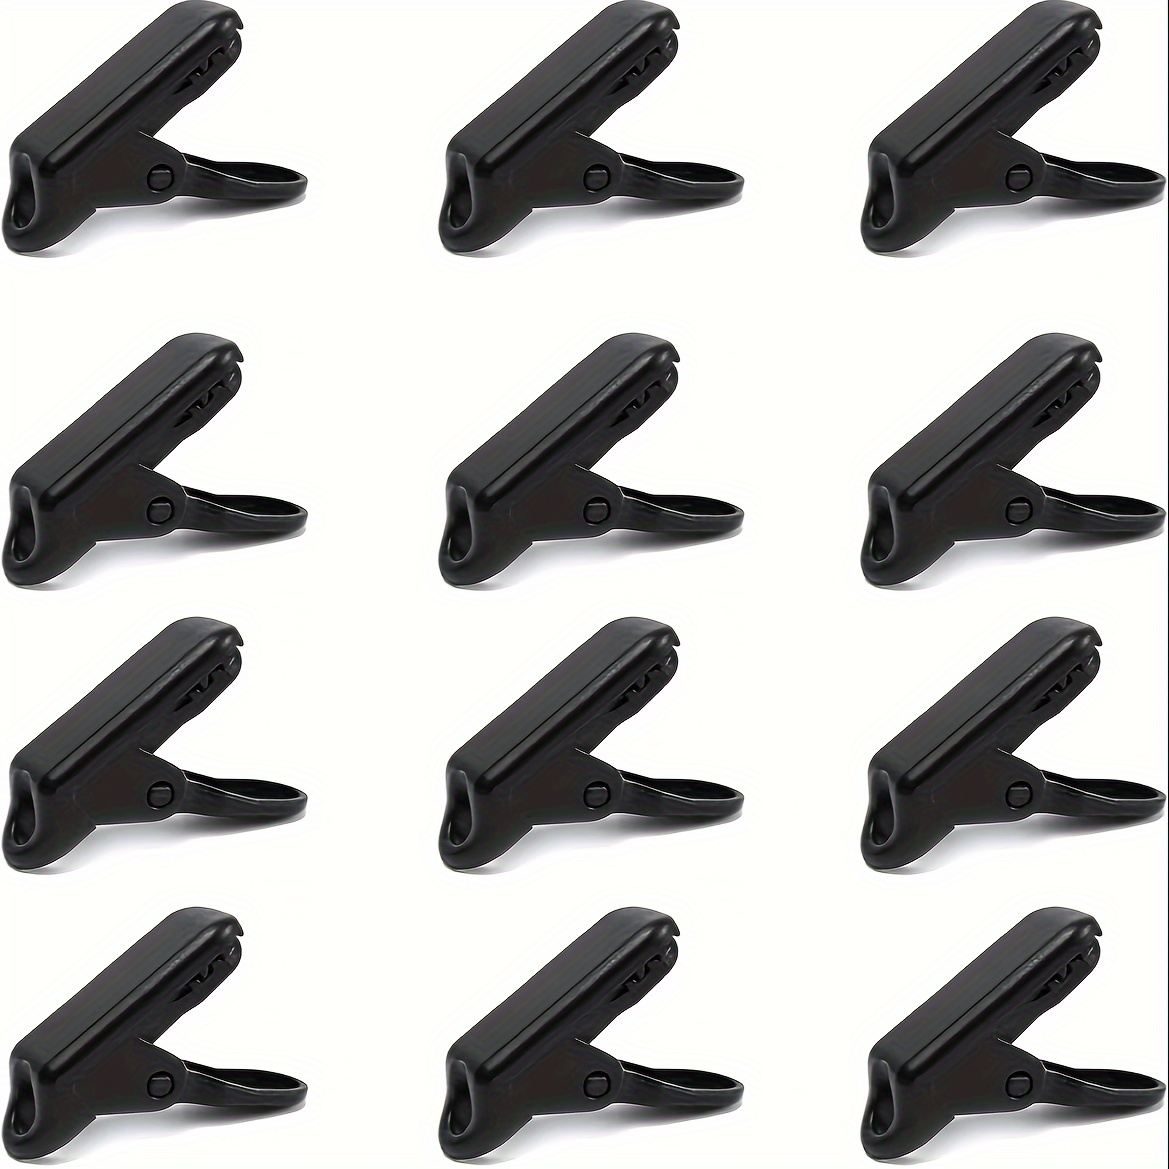 12pcs windproof tarp clips for camping and hiking securely fasten tents and awnings with crocodile clamps sports & outdoors 1